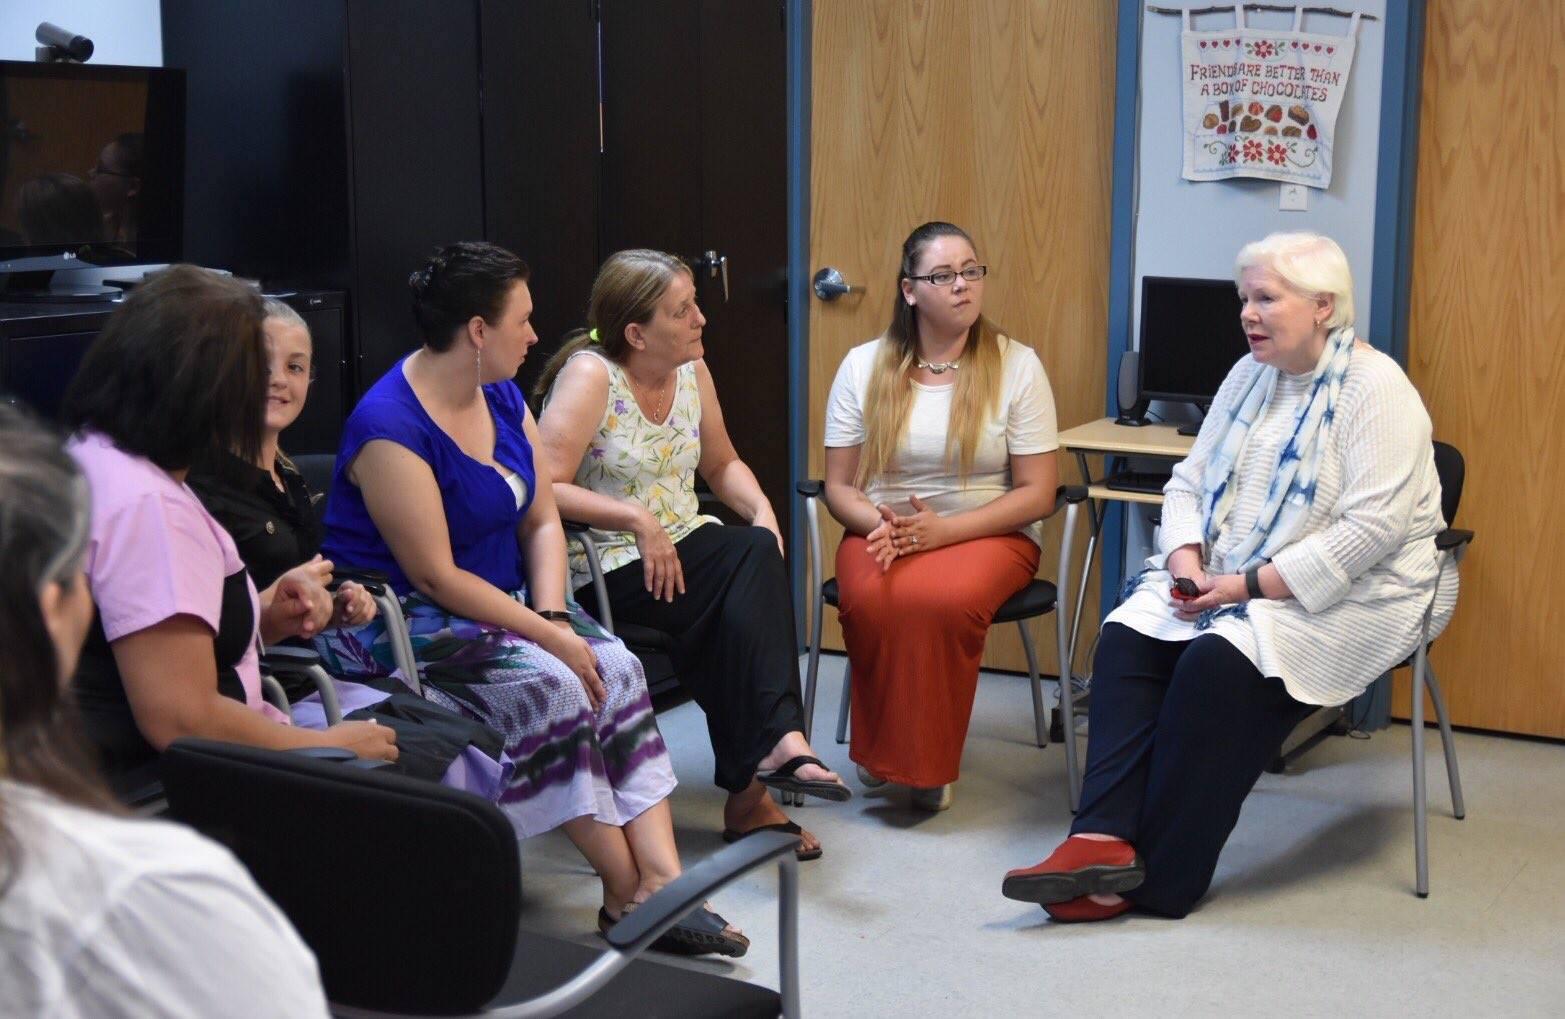 The Lieutenant Governor speaks with community members during a visit to the Ontario Native Women’s Association’s satellite office in Geraldton.